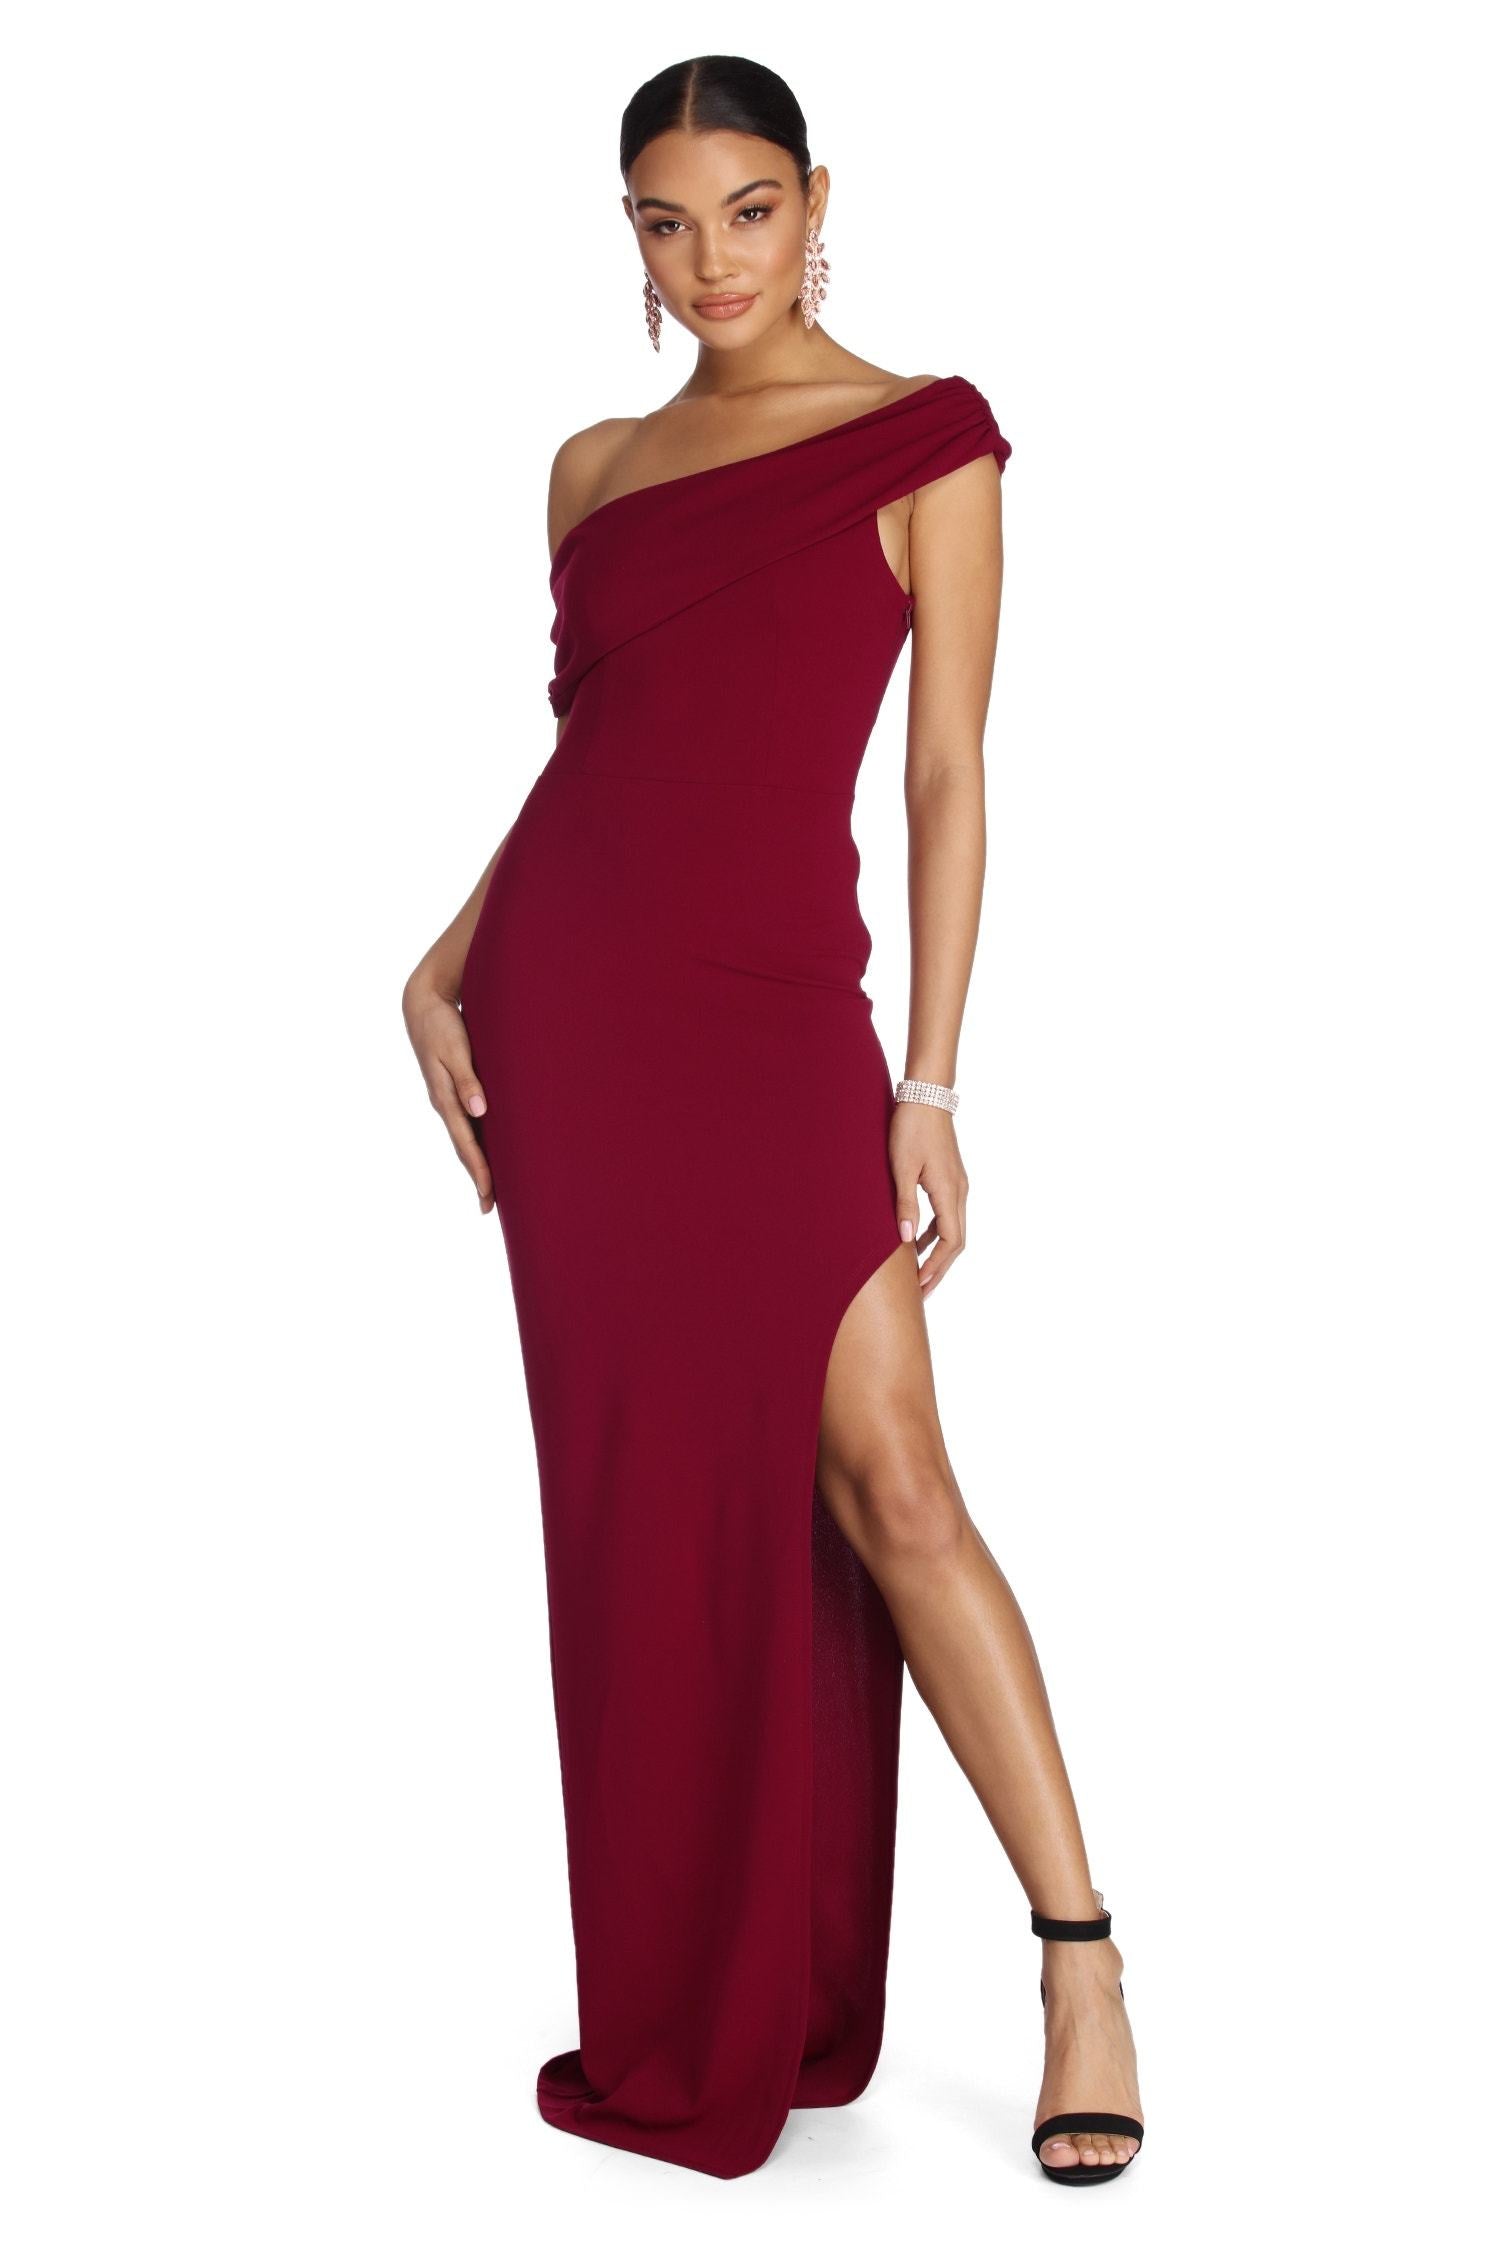 Althea Formal One Shoulder Dress - Lady Occasions